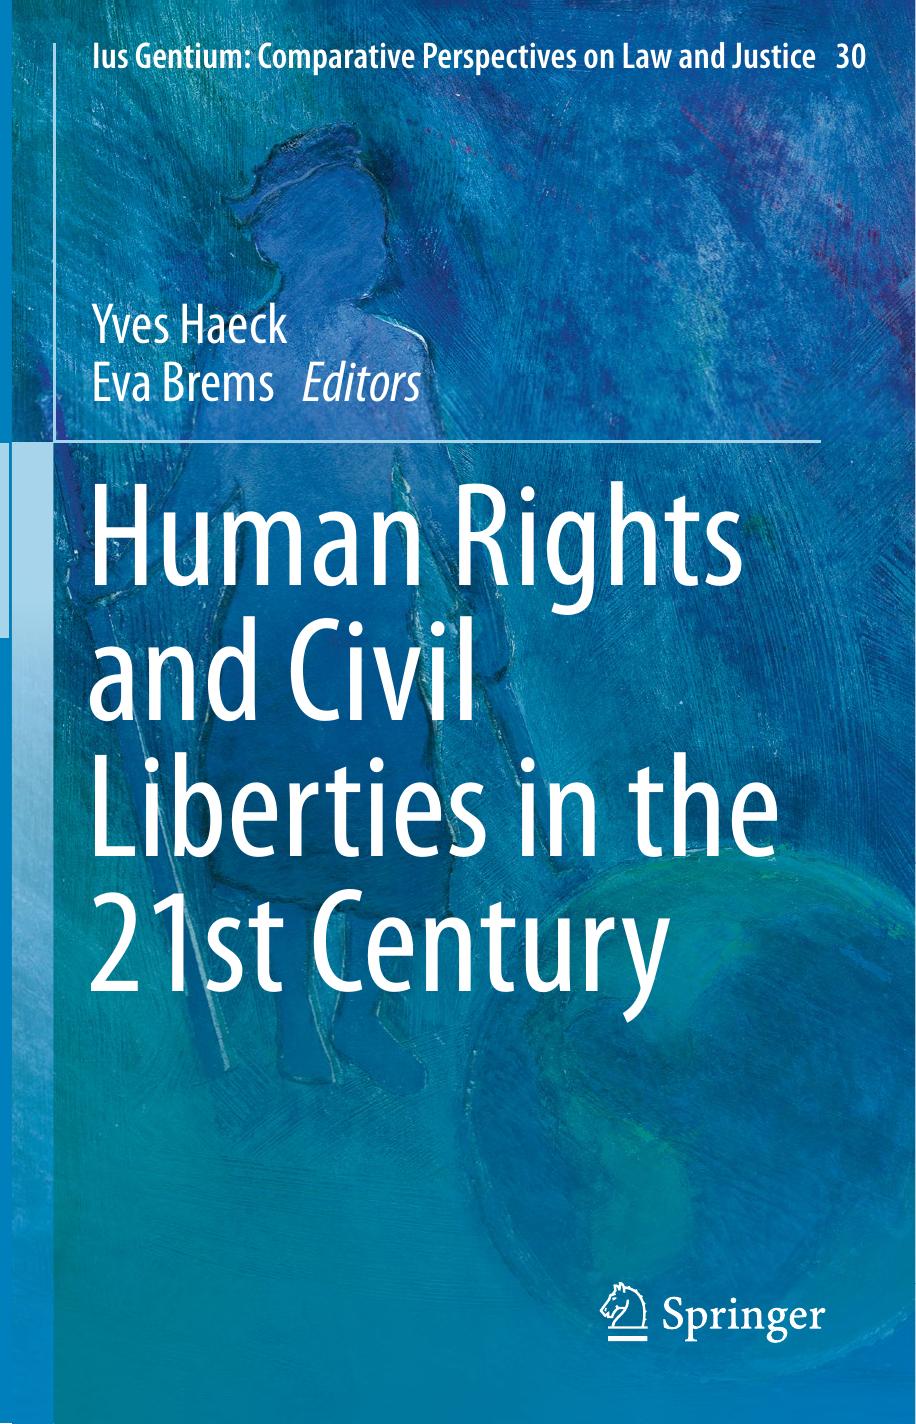 Human Rights and Civil Liberties in the 21st Century 2014